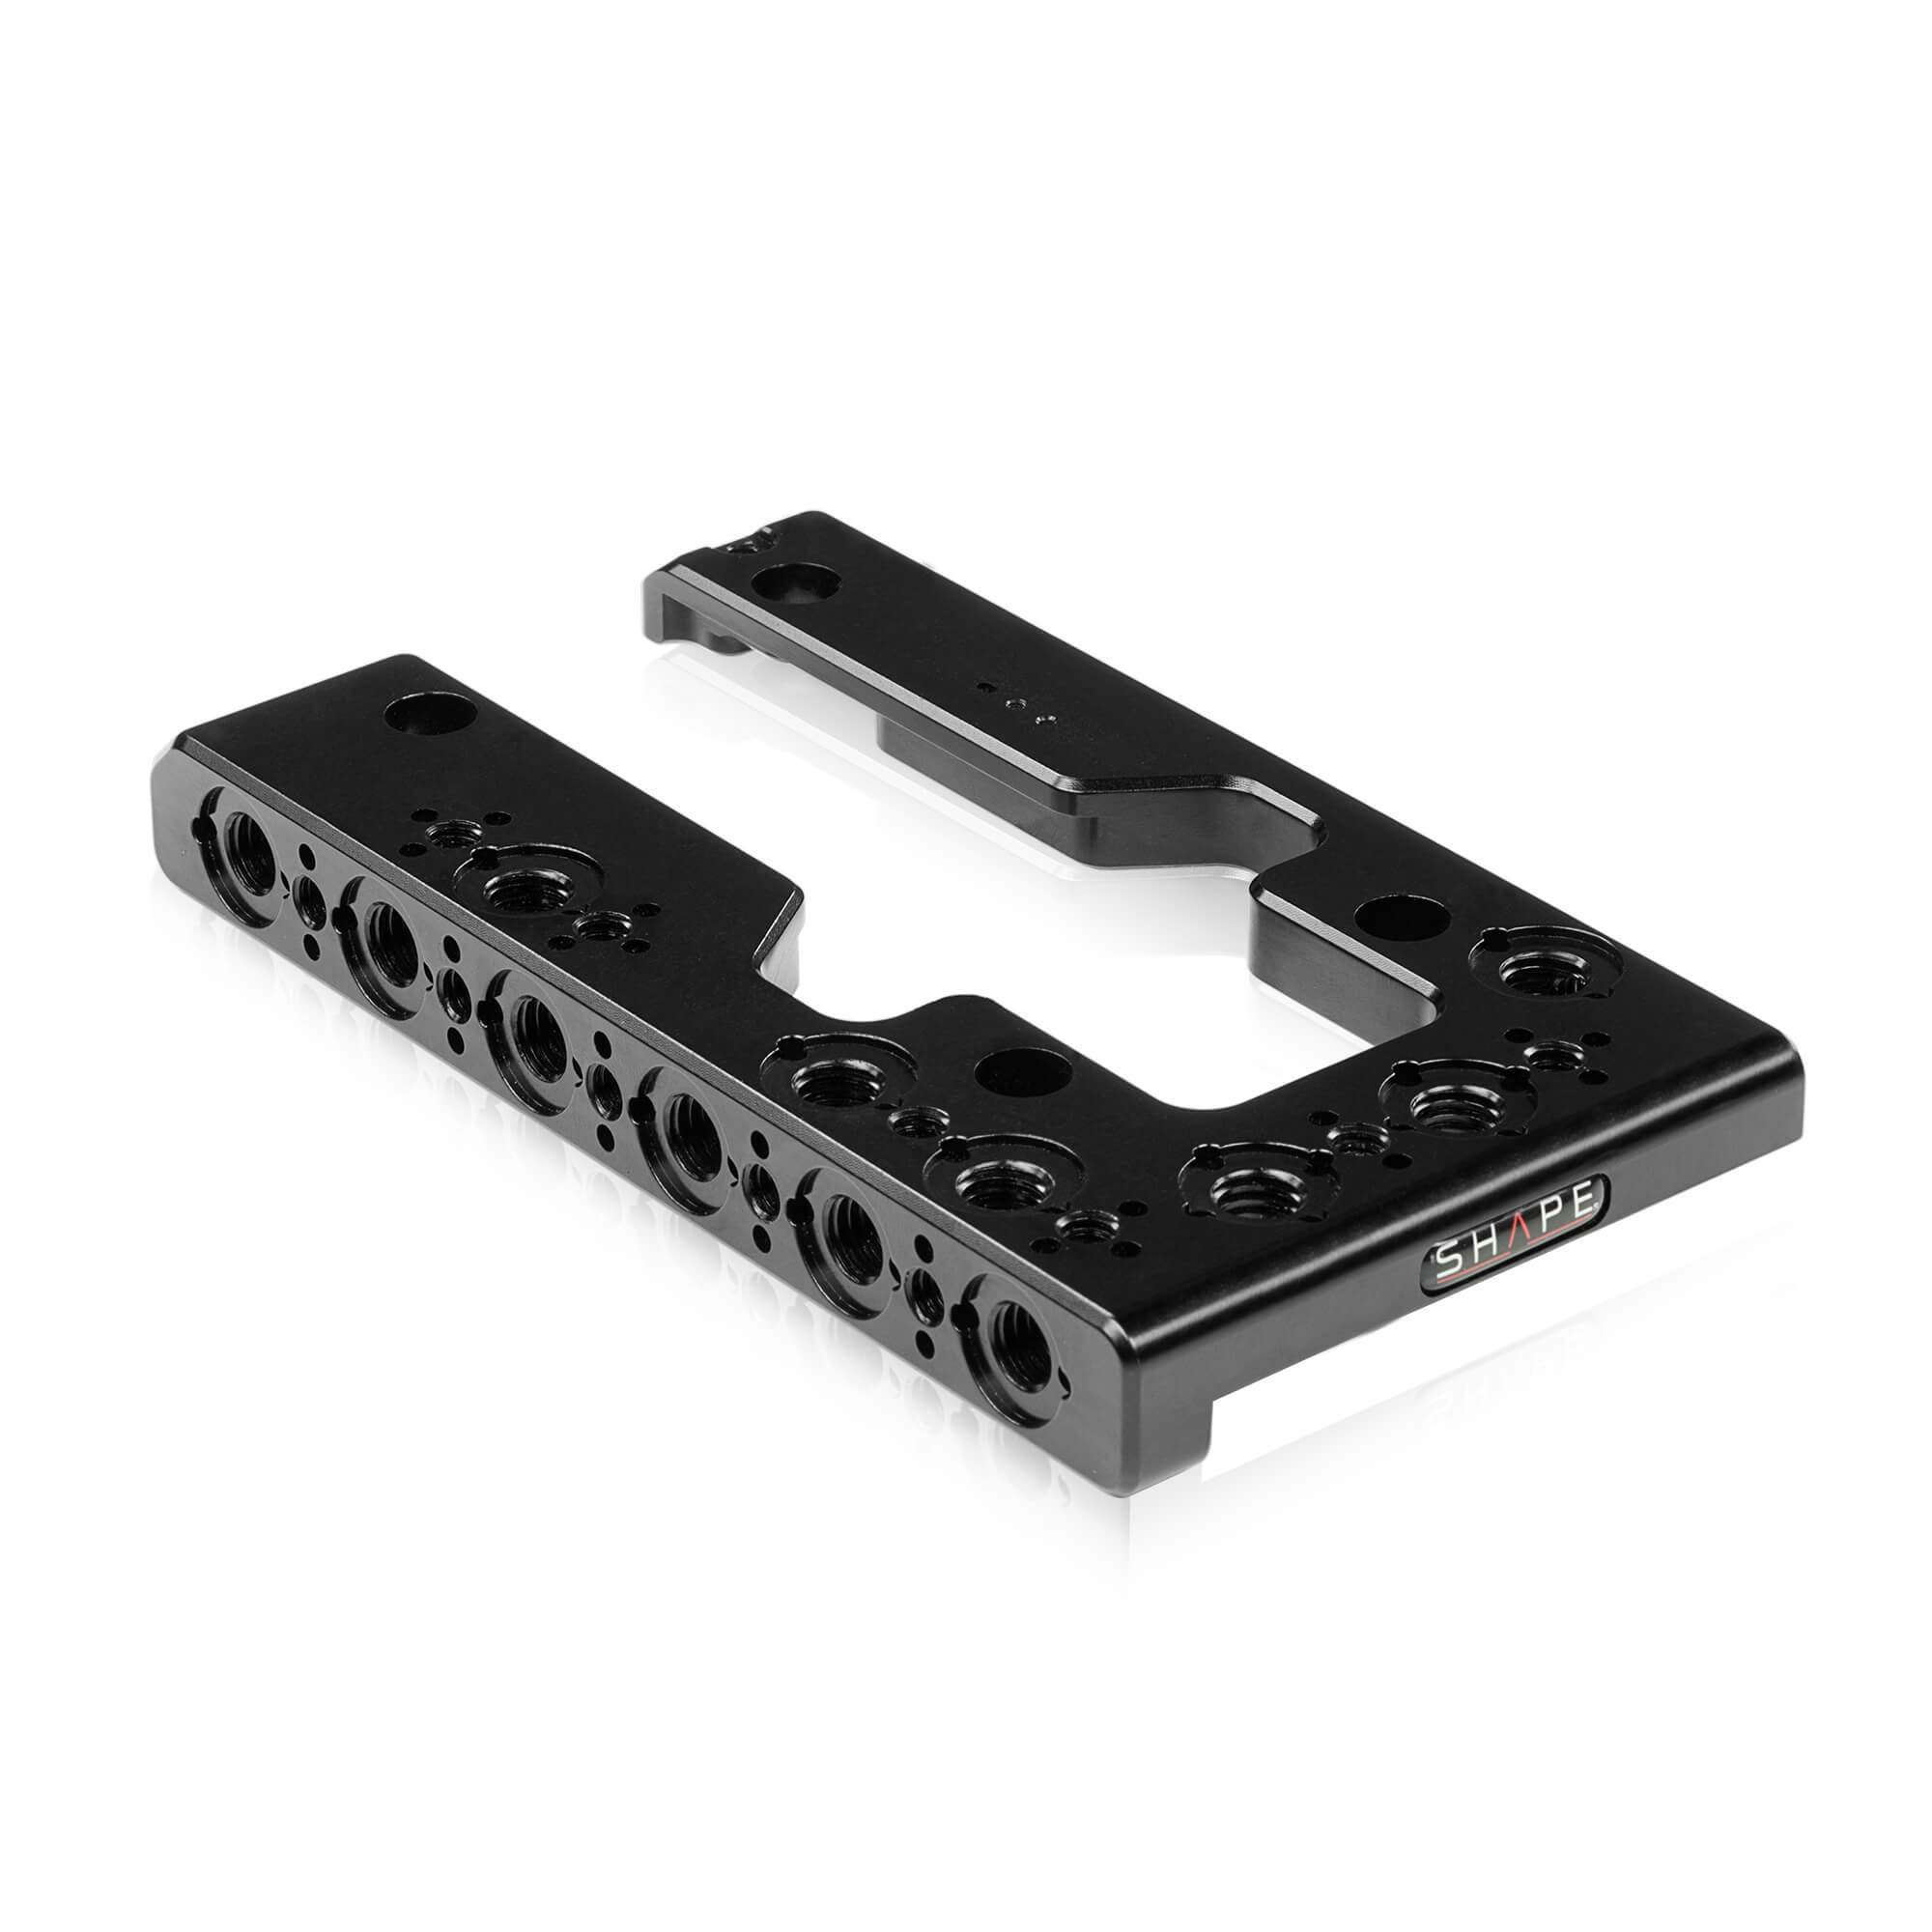 SHAPE Top Plate for Sony FX9